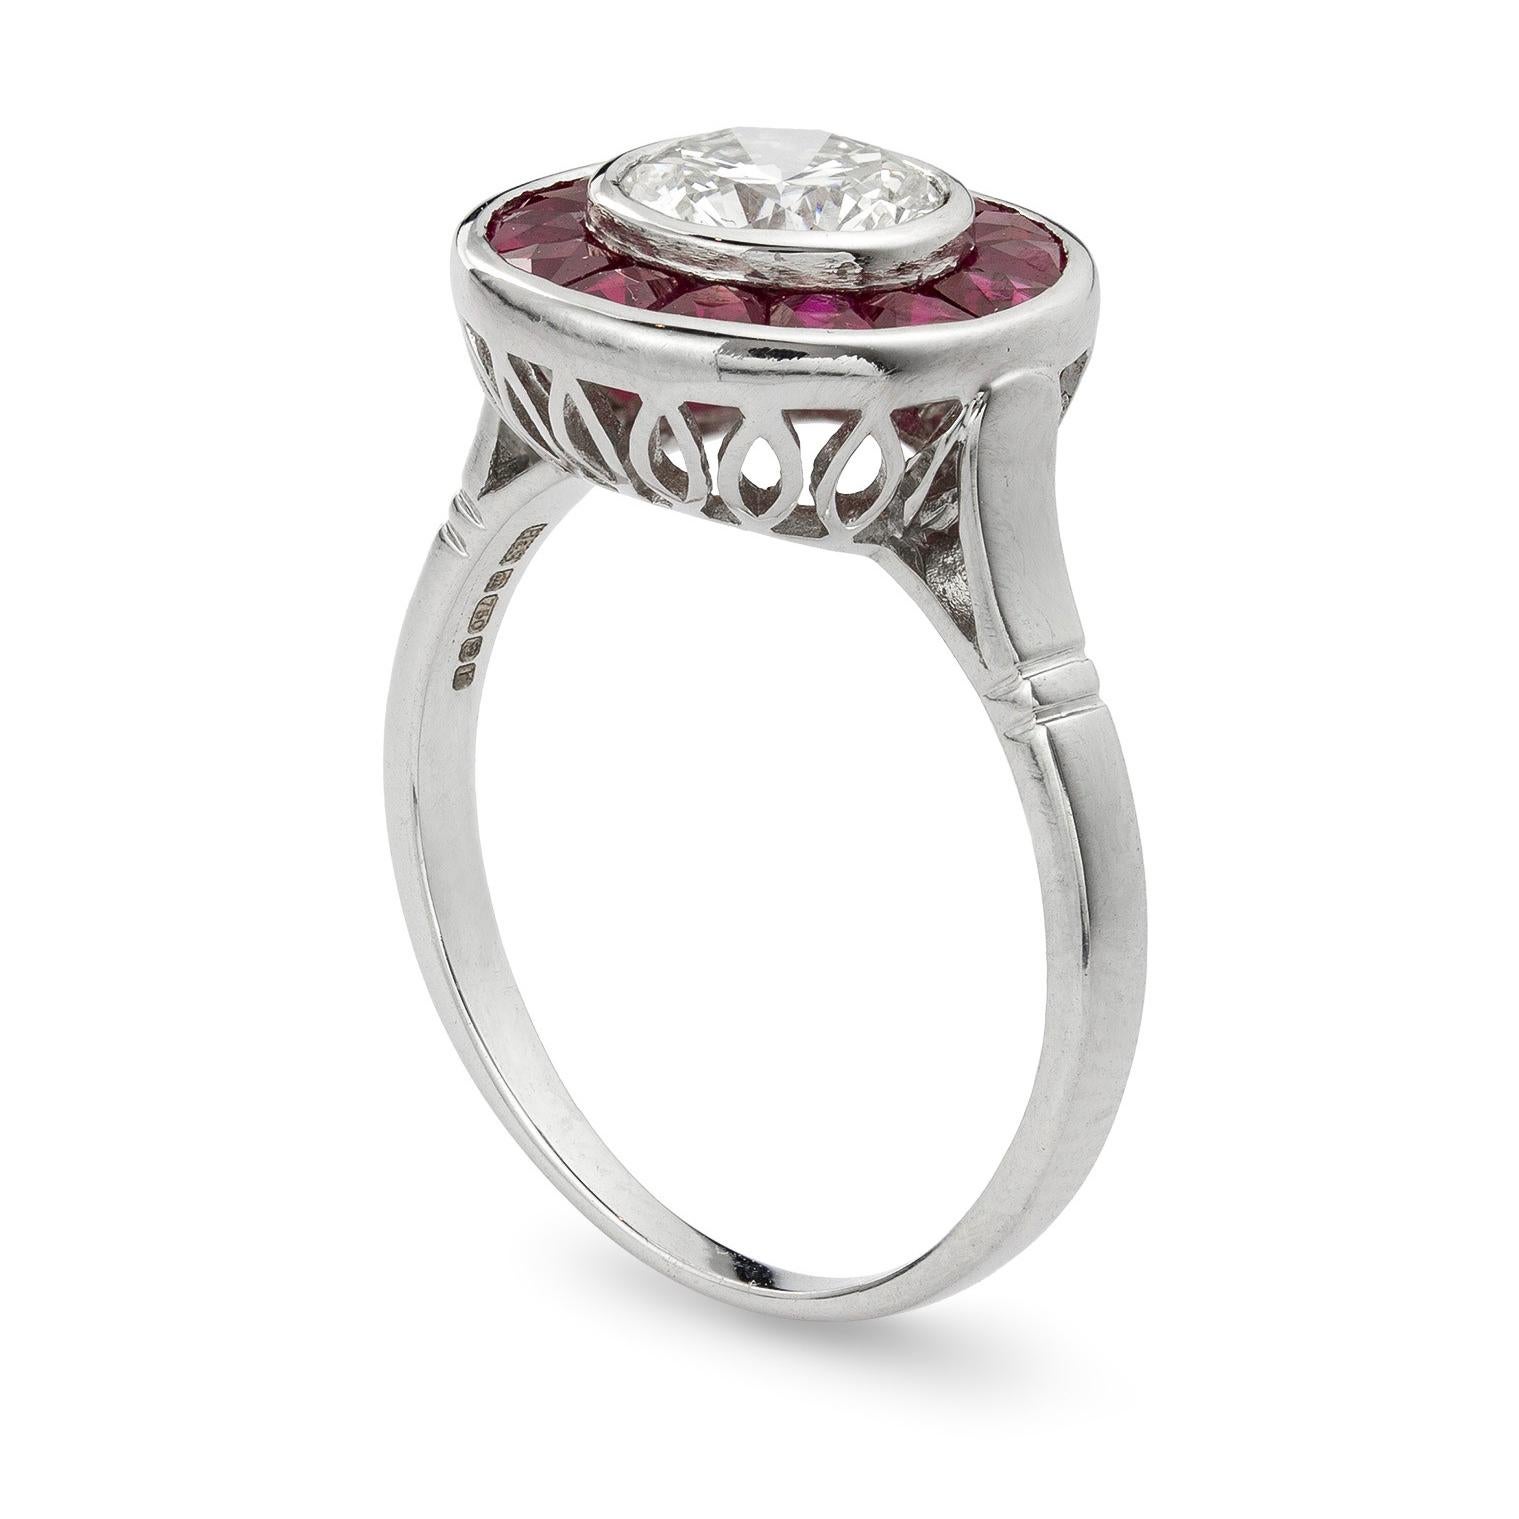 A diamond and ruby target ring, rubover-set to the centre with a round brilliant-cut diamond weighing 1.1 carats surrounded by calibre-cut rubies, all set in white gold, hallmarked 18ct gold, London, 2016, bearing the Bentley & Skinner sponsor mark,